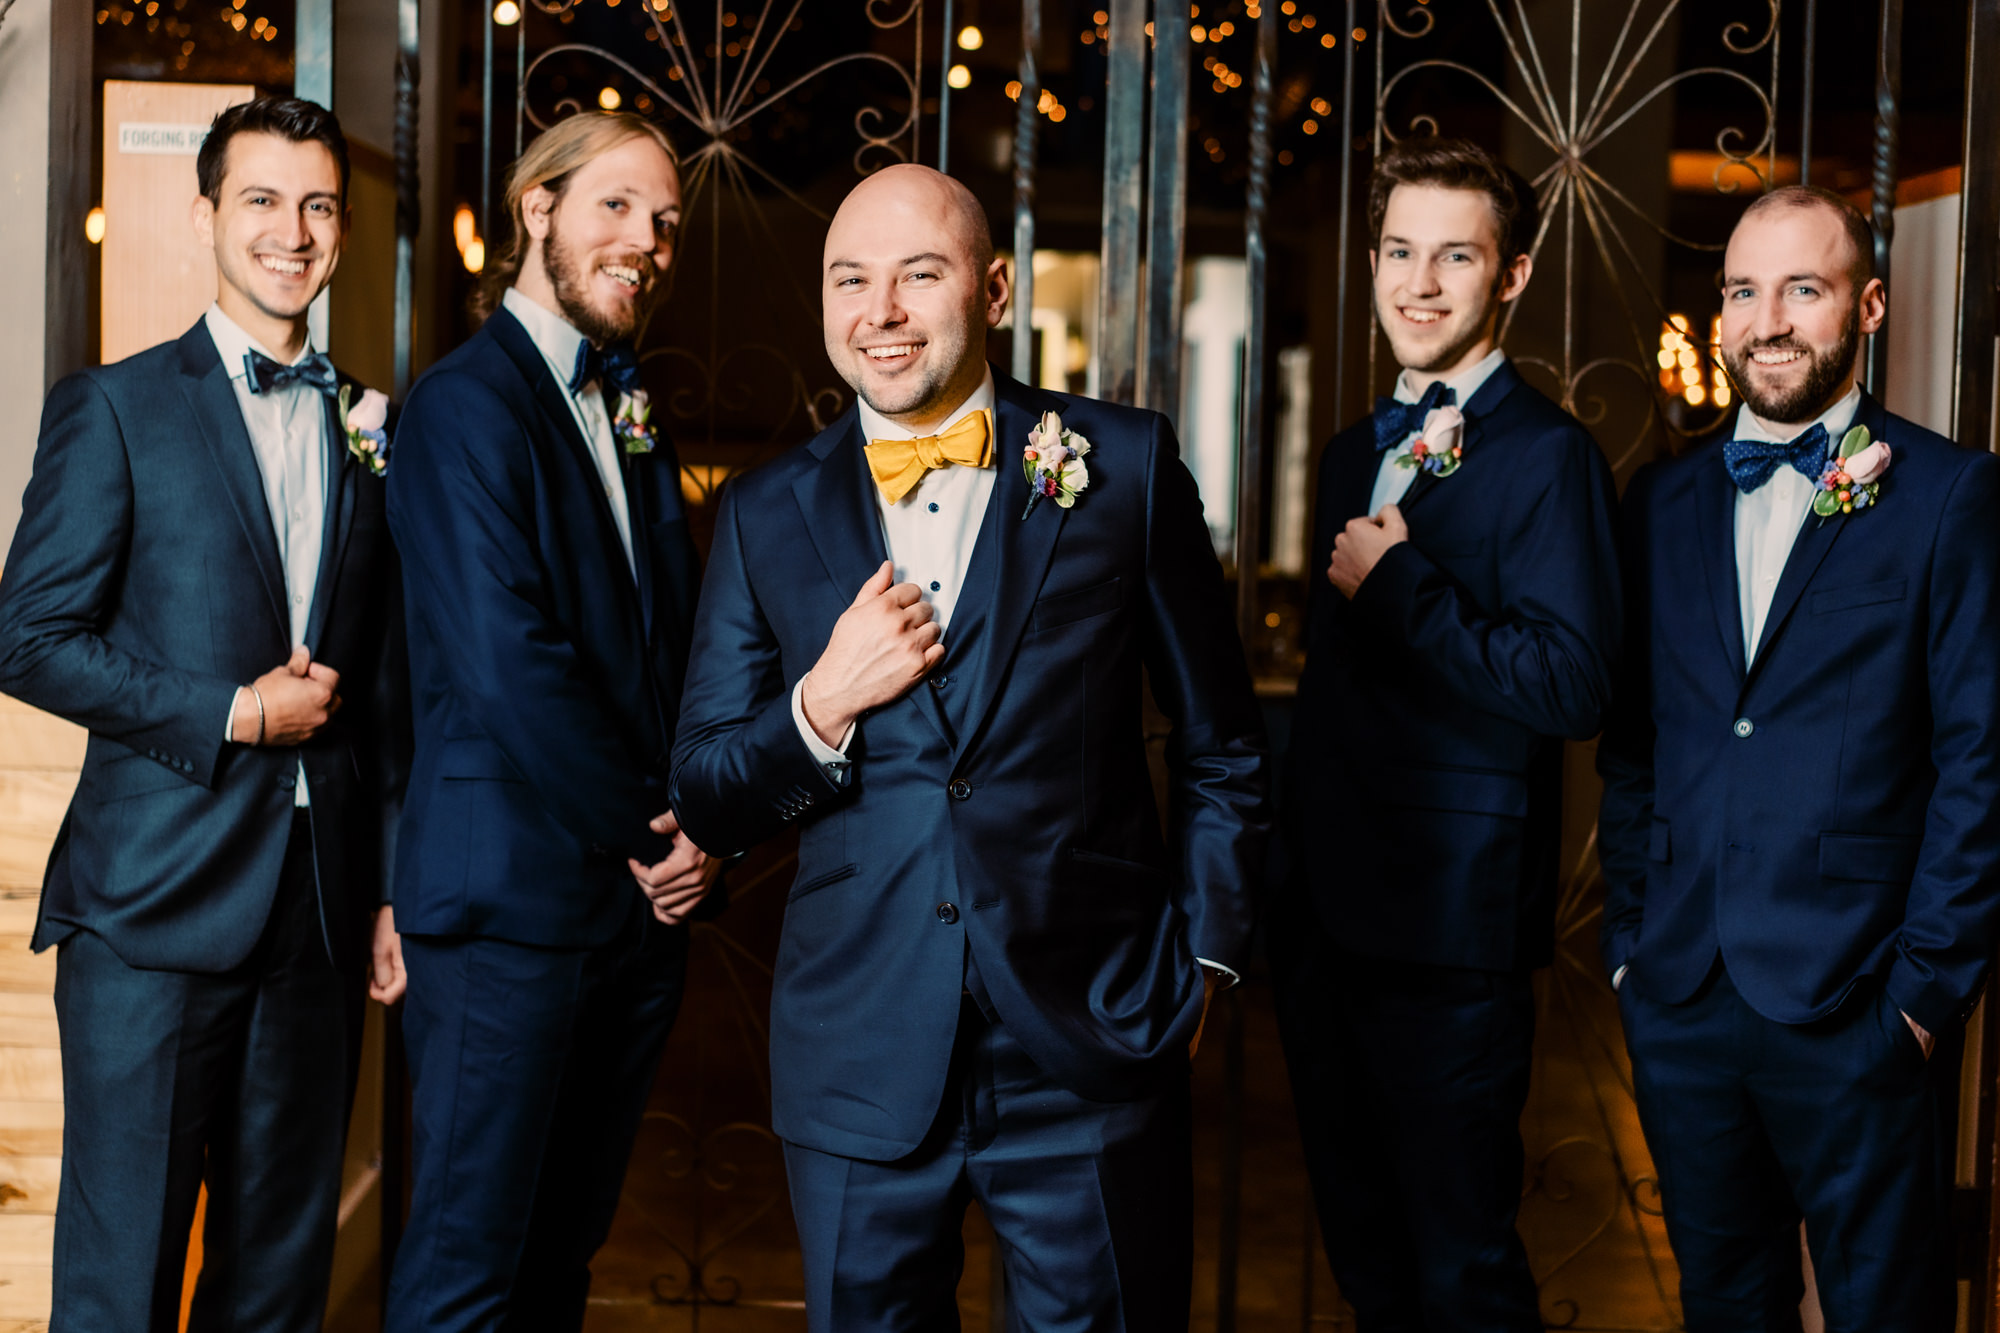 Joe and his groomsmen at the Foundry by Herban Feast